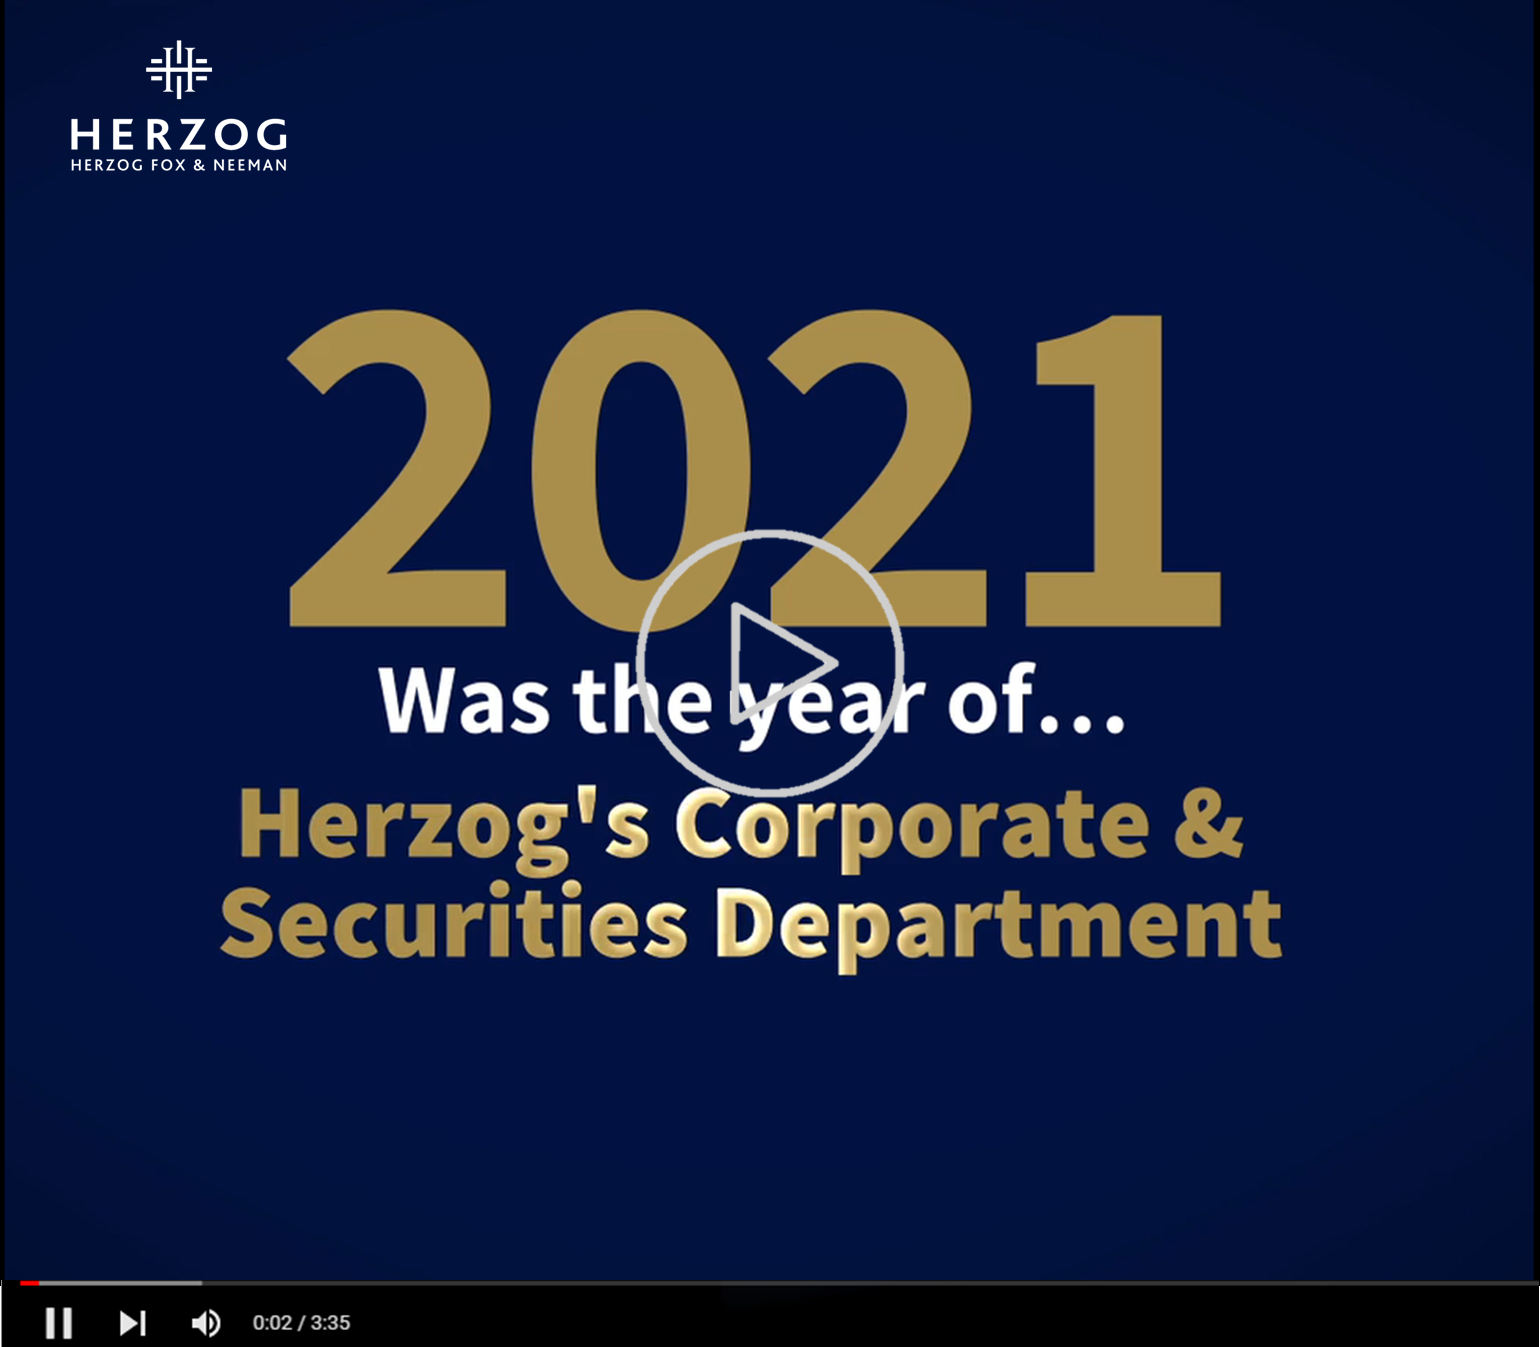 2021 was the year of Herzog's corporate & securities department. for the full video click here 